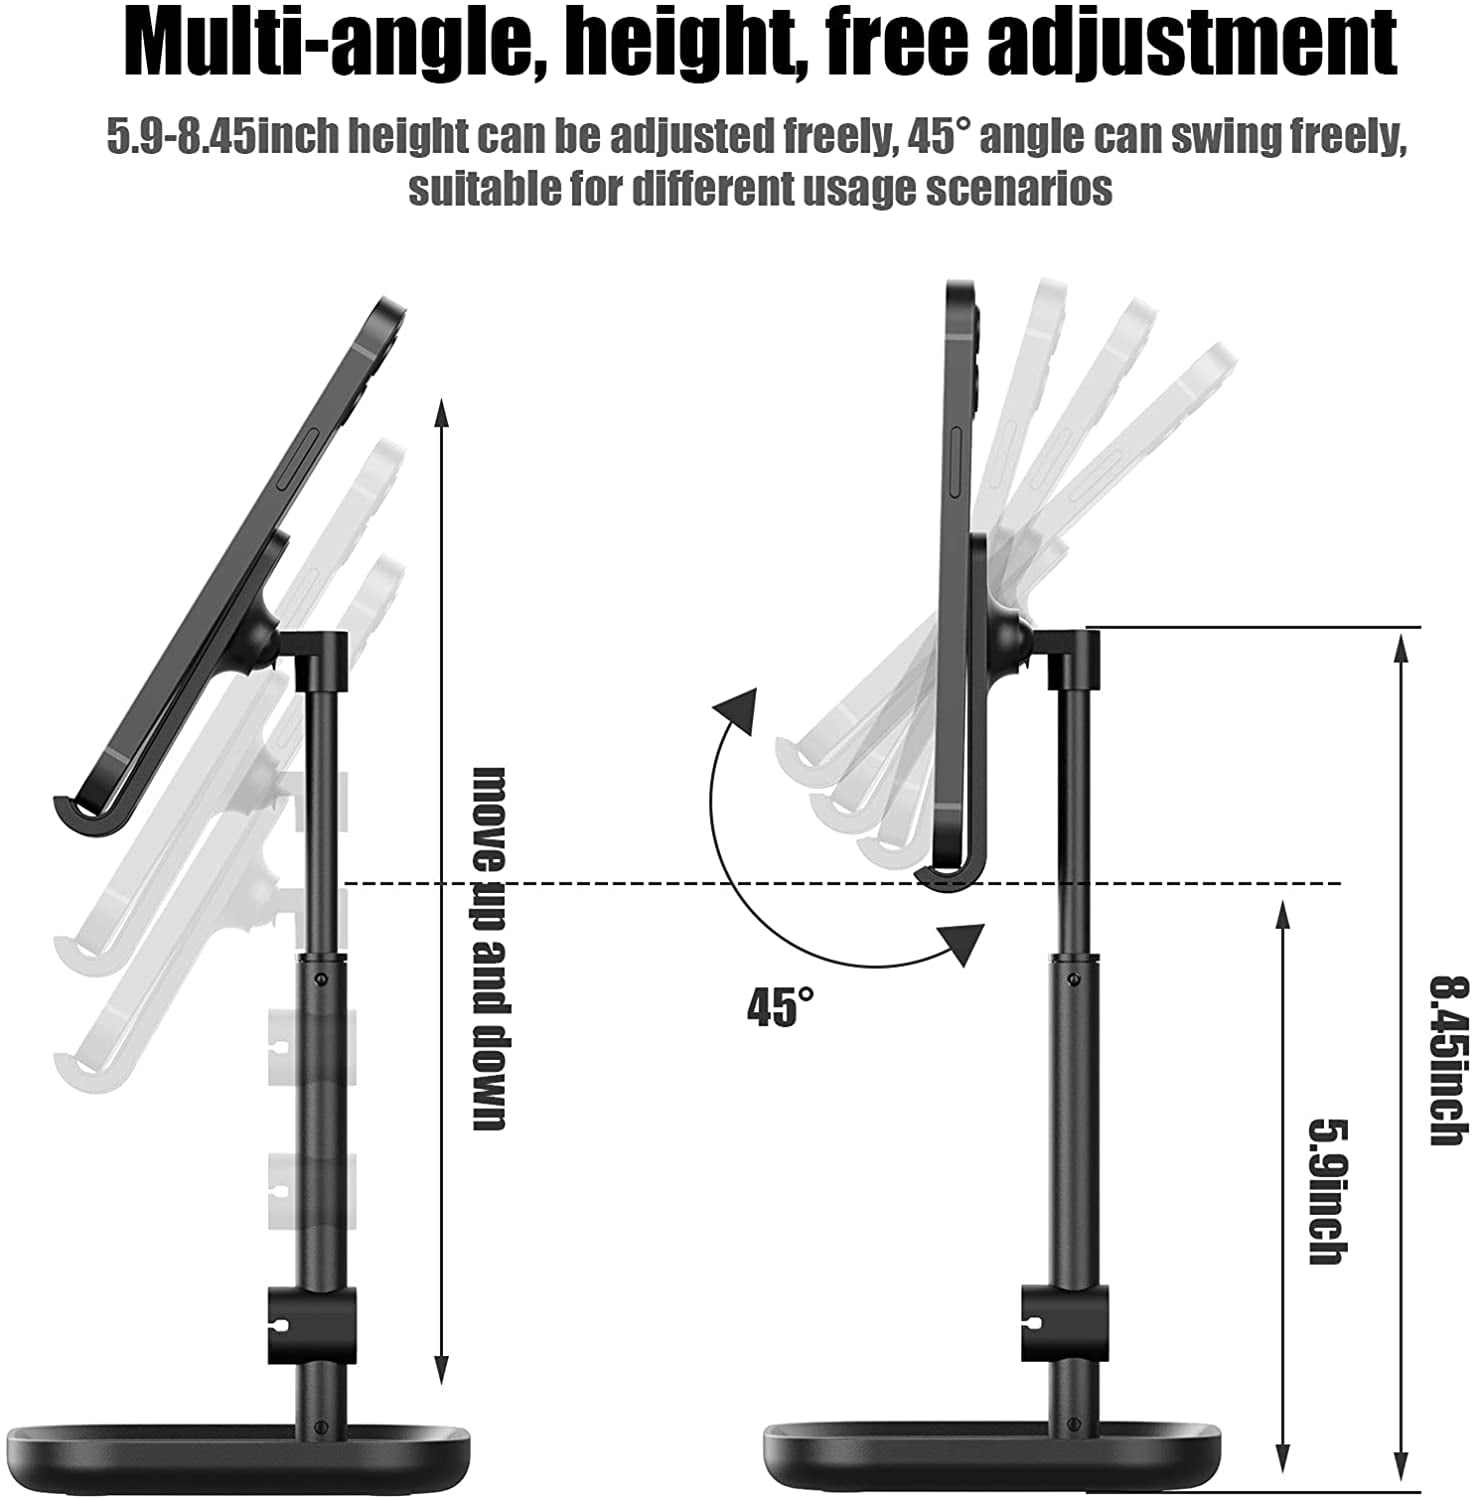 Compatible with iPhone iPad HORUMP Angle Height Adjustable Phone Holder Stand for Desk Cell Phone Stand for Desk All Mobile Phones Kindle Tablet 